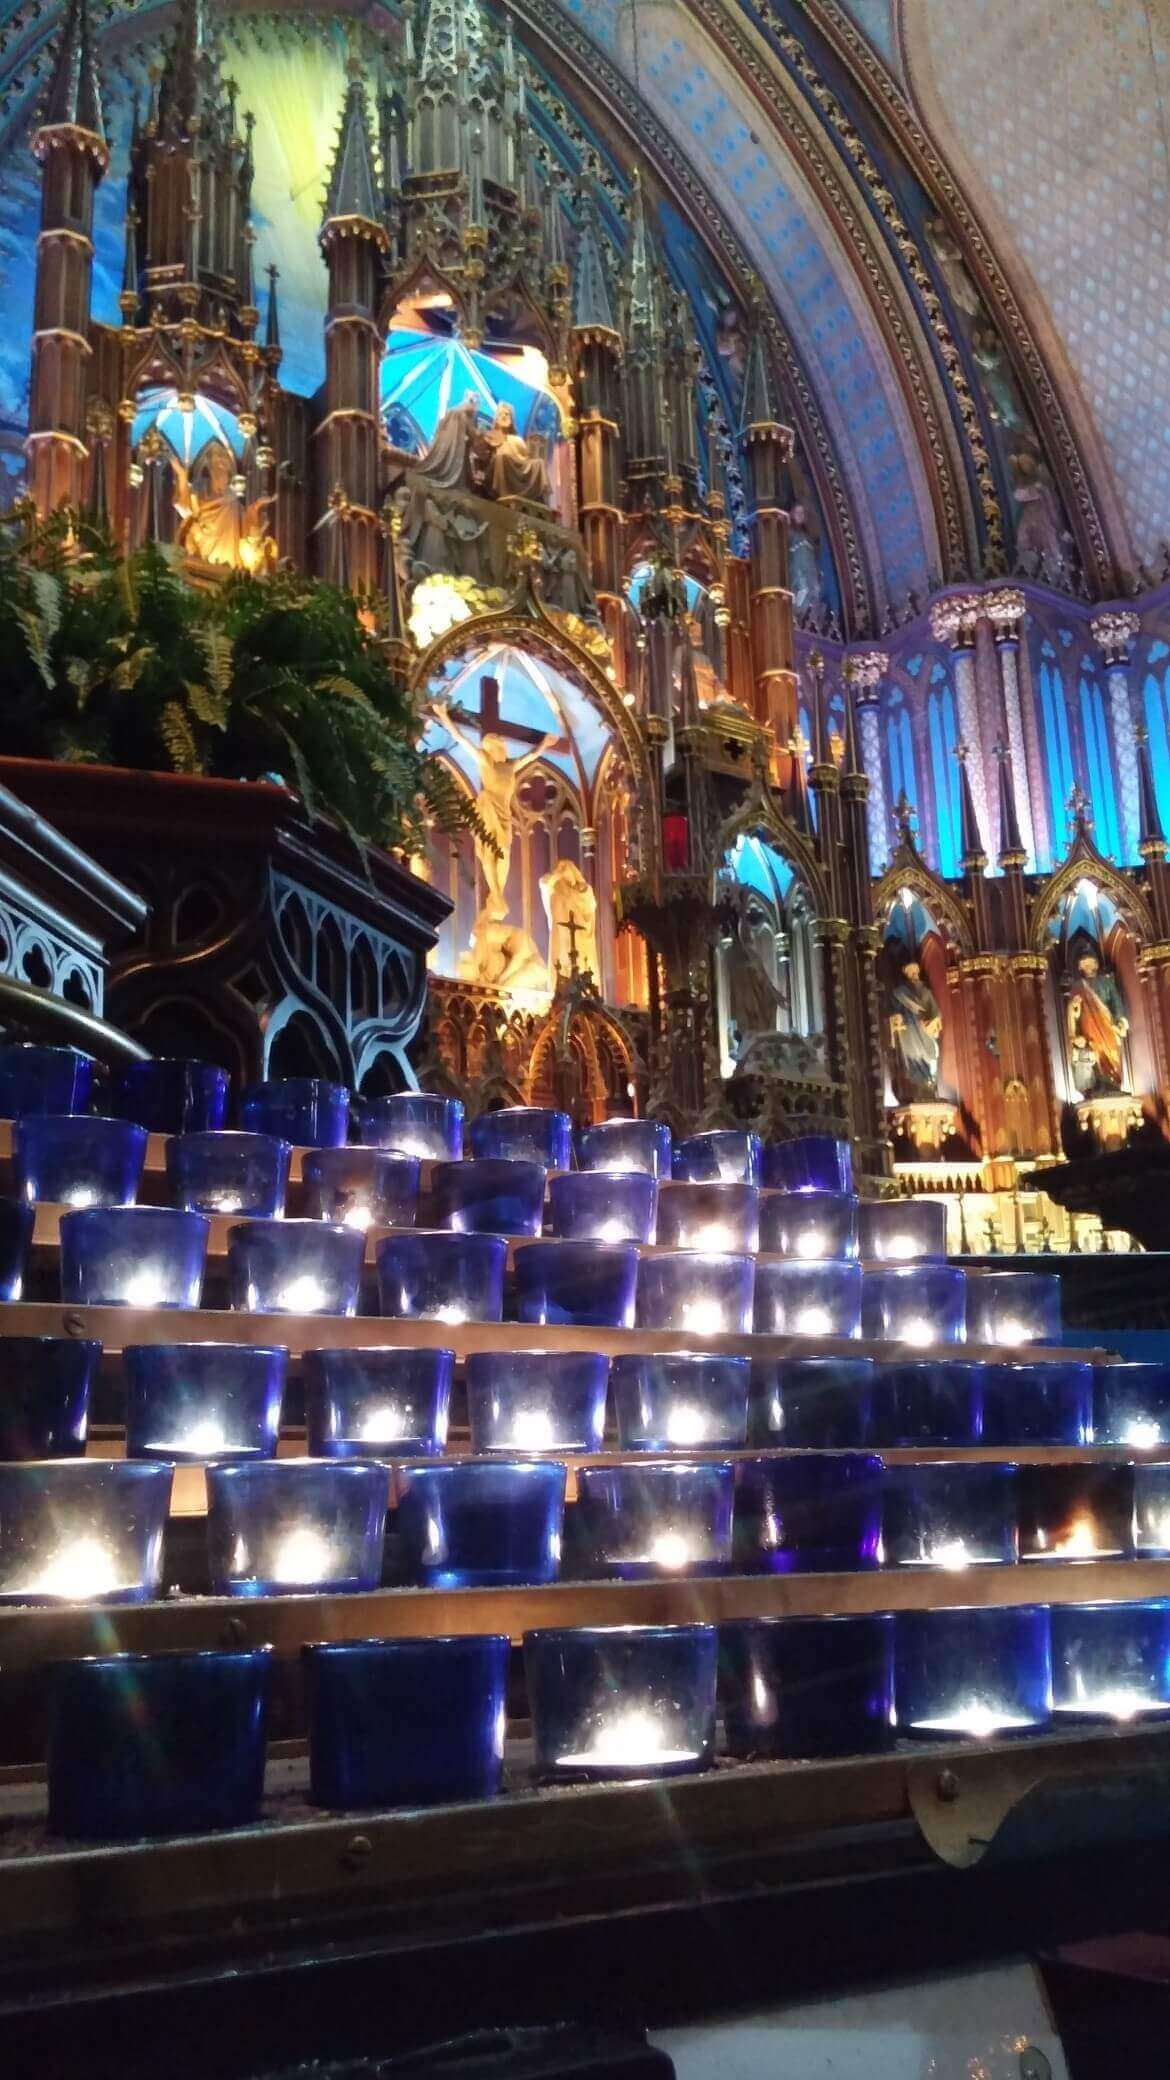 Blue and other colored candles are everywhere inside the cathedral